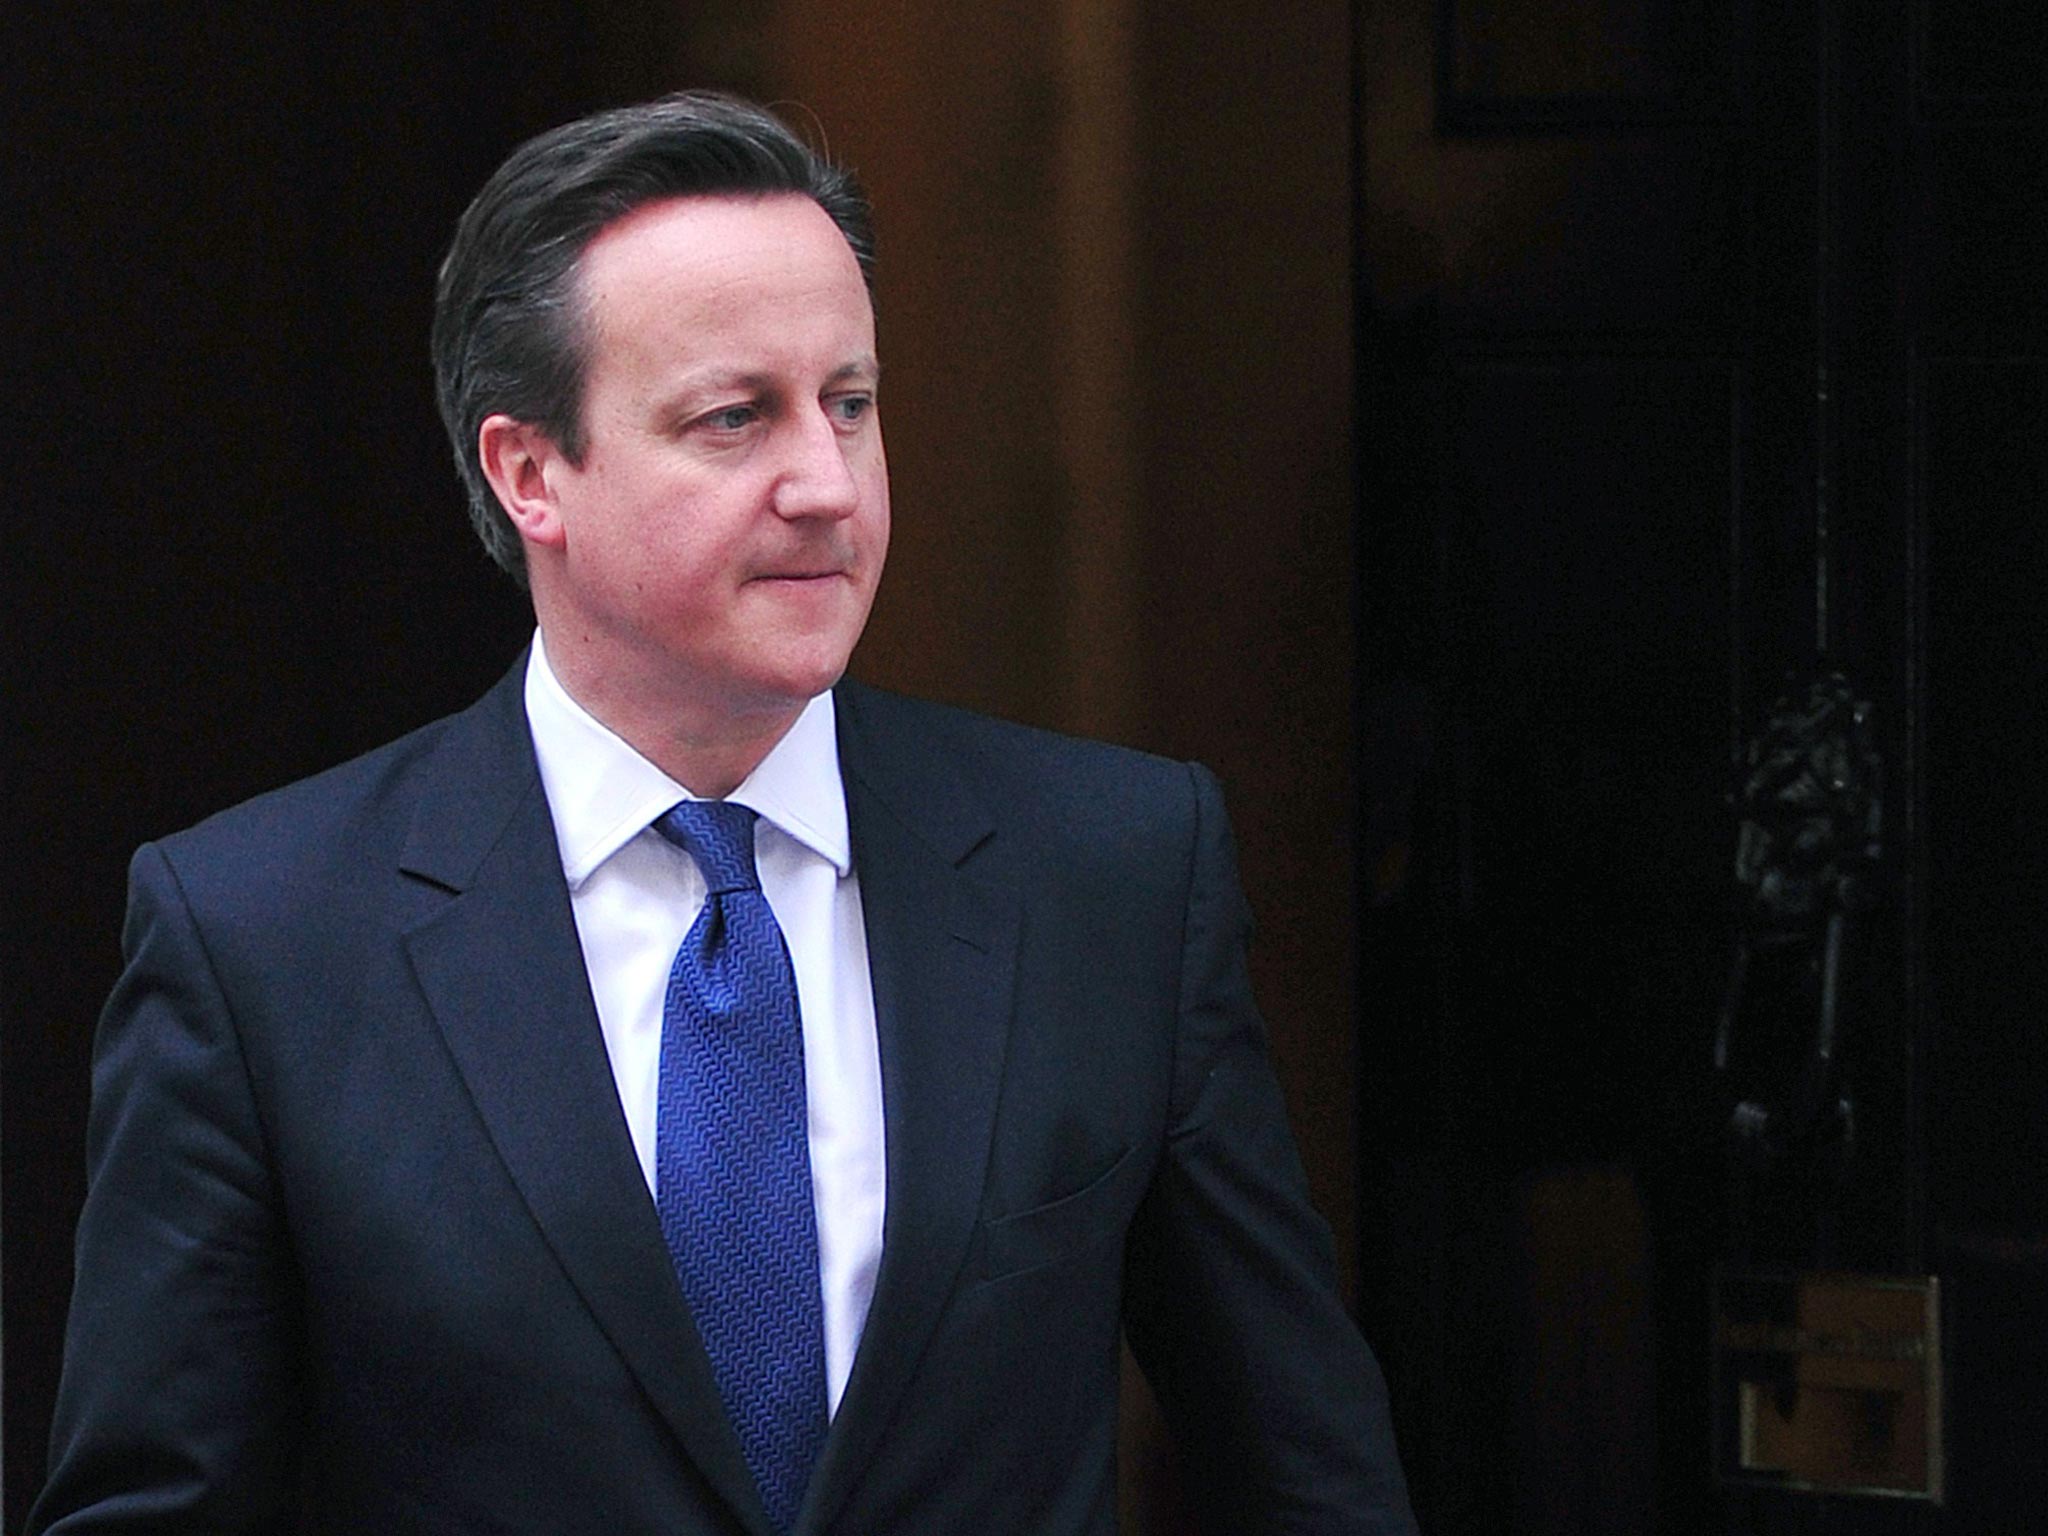 David Cameron has invoked divine backing for the Big Society